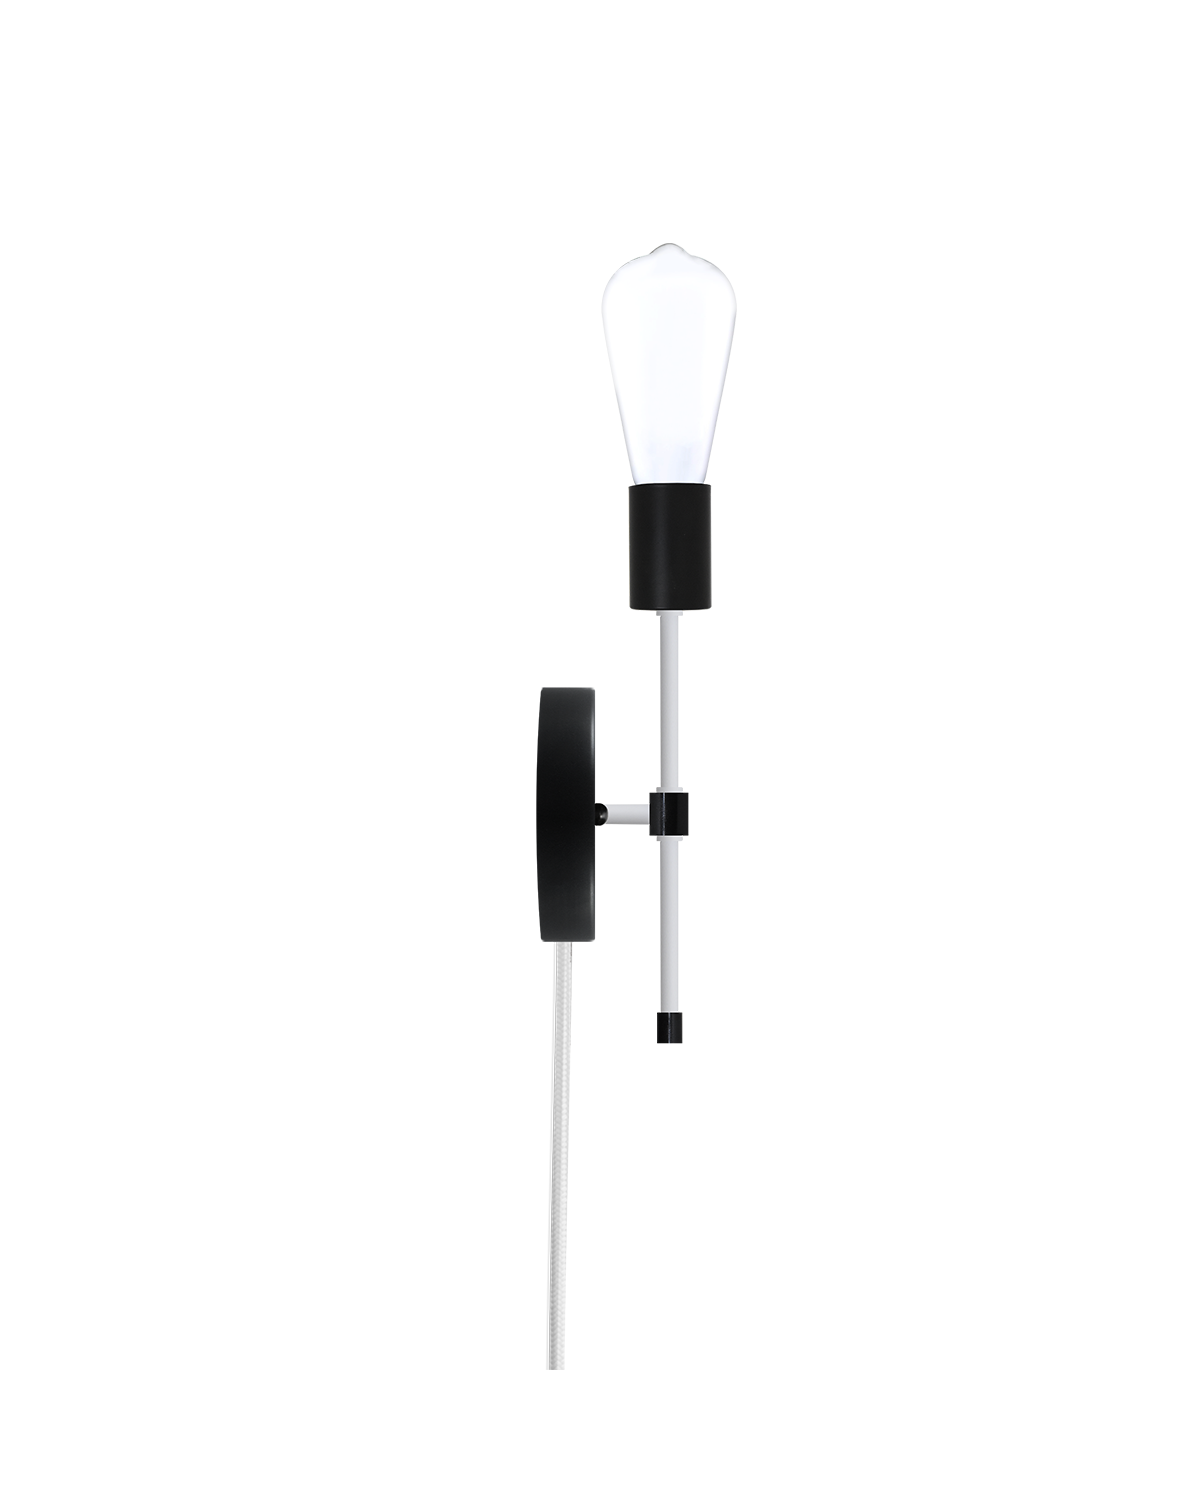 Plug-In Torch Wall Sconce: Black and White Hangout Lighting 